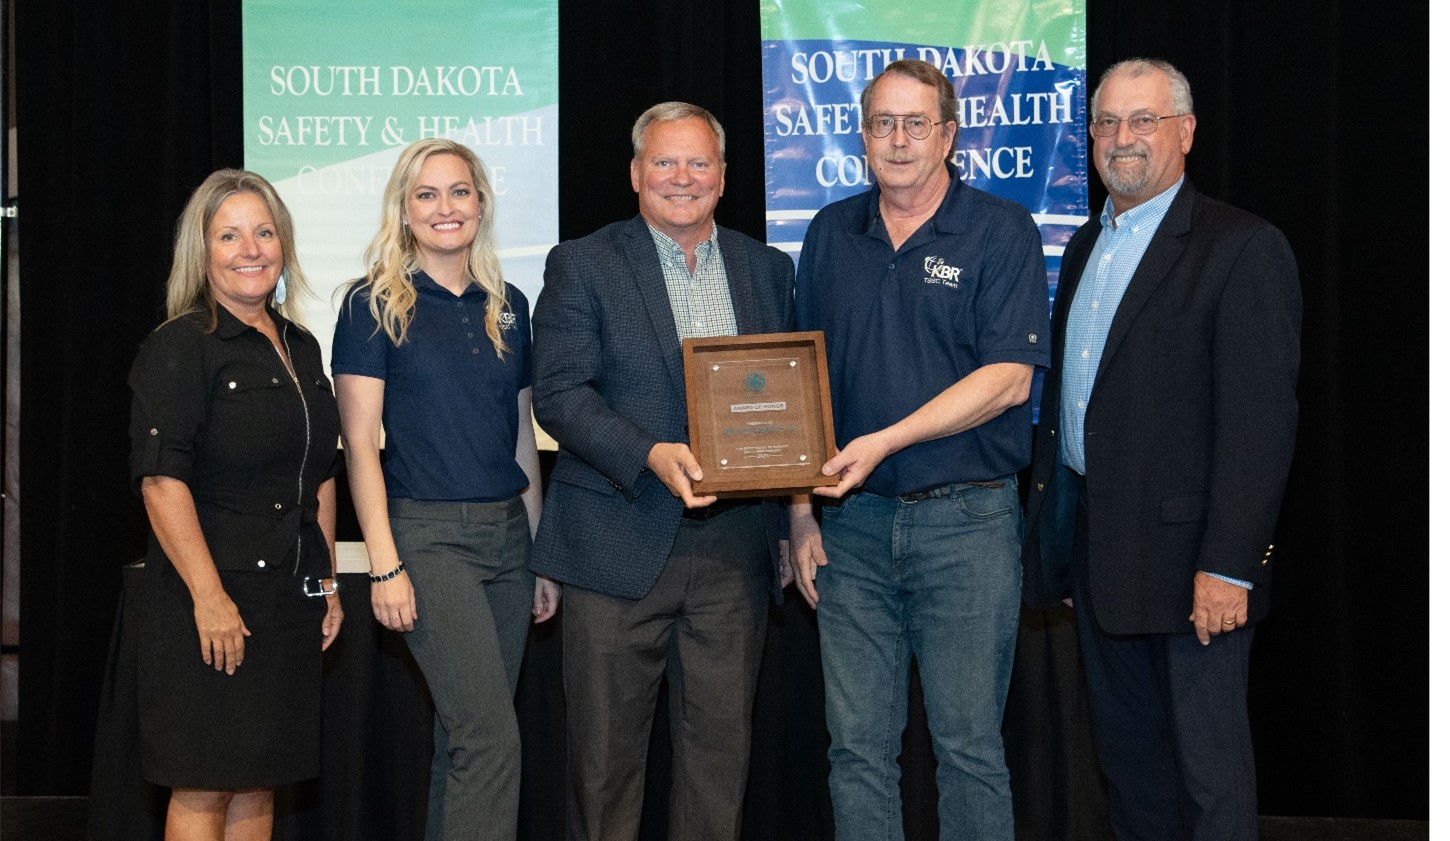 The KBR/TSSC team accepts the 2021 South Dakota Workplace Safety Council - Award of Honor at the South Dakota Safety Conference luncheon event on Oct. 5, 2022. Featured from left to right: Janie Ritter, Executive Director of SD Safety Council; Bobbi Britt - KBR/TSSC Human Resources; Douglas Jaton - KBR/TSSC Program Manager; Brent Nelson, KBR/TSSC Zero Harm Safety Manager; and James Carnes, KBR/S&S Corporate Zero Harm Safety Manager.